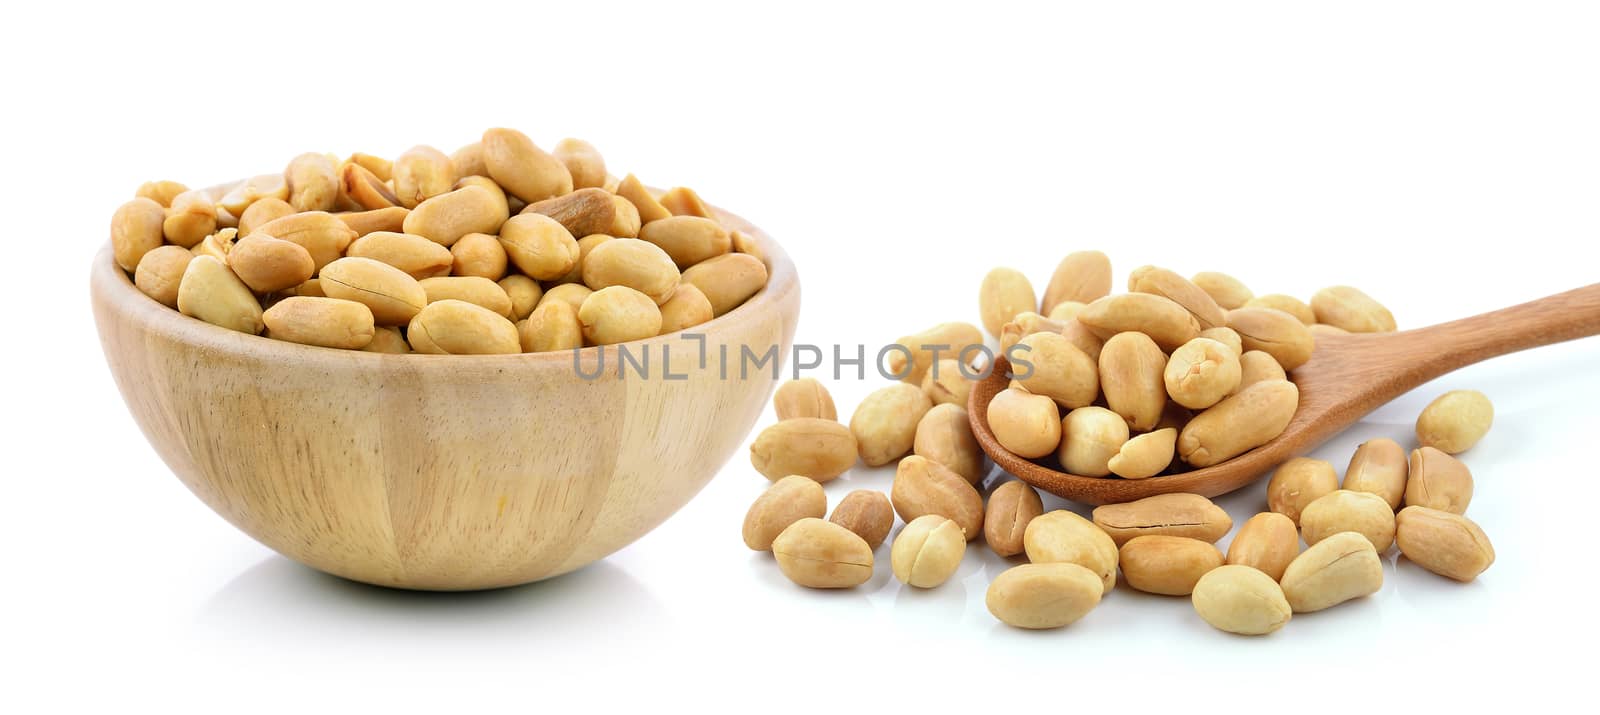 peanuts in a wood bowl on white background by sommai